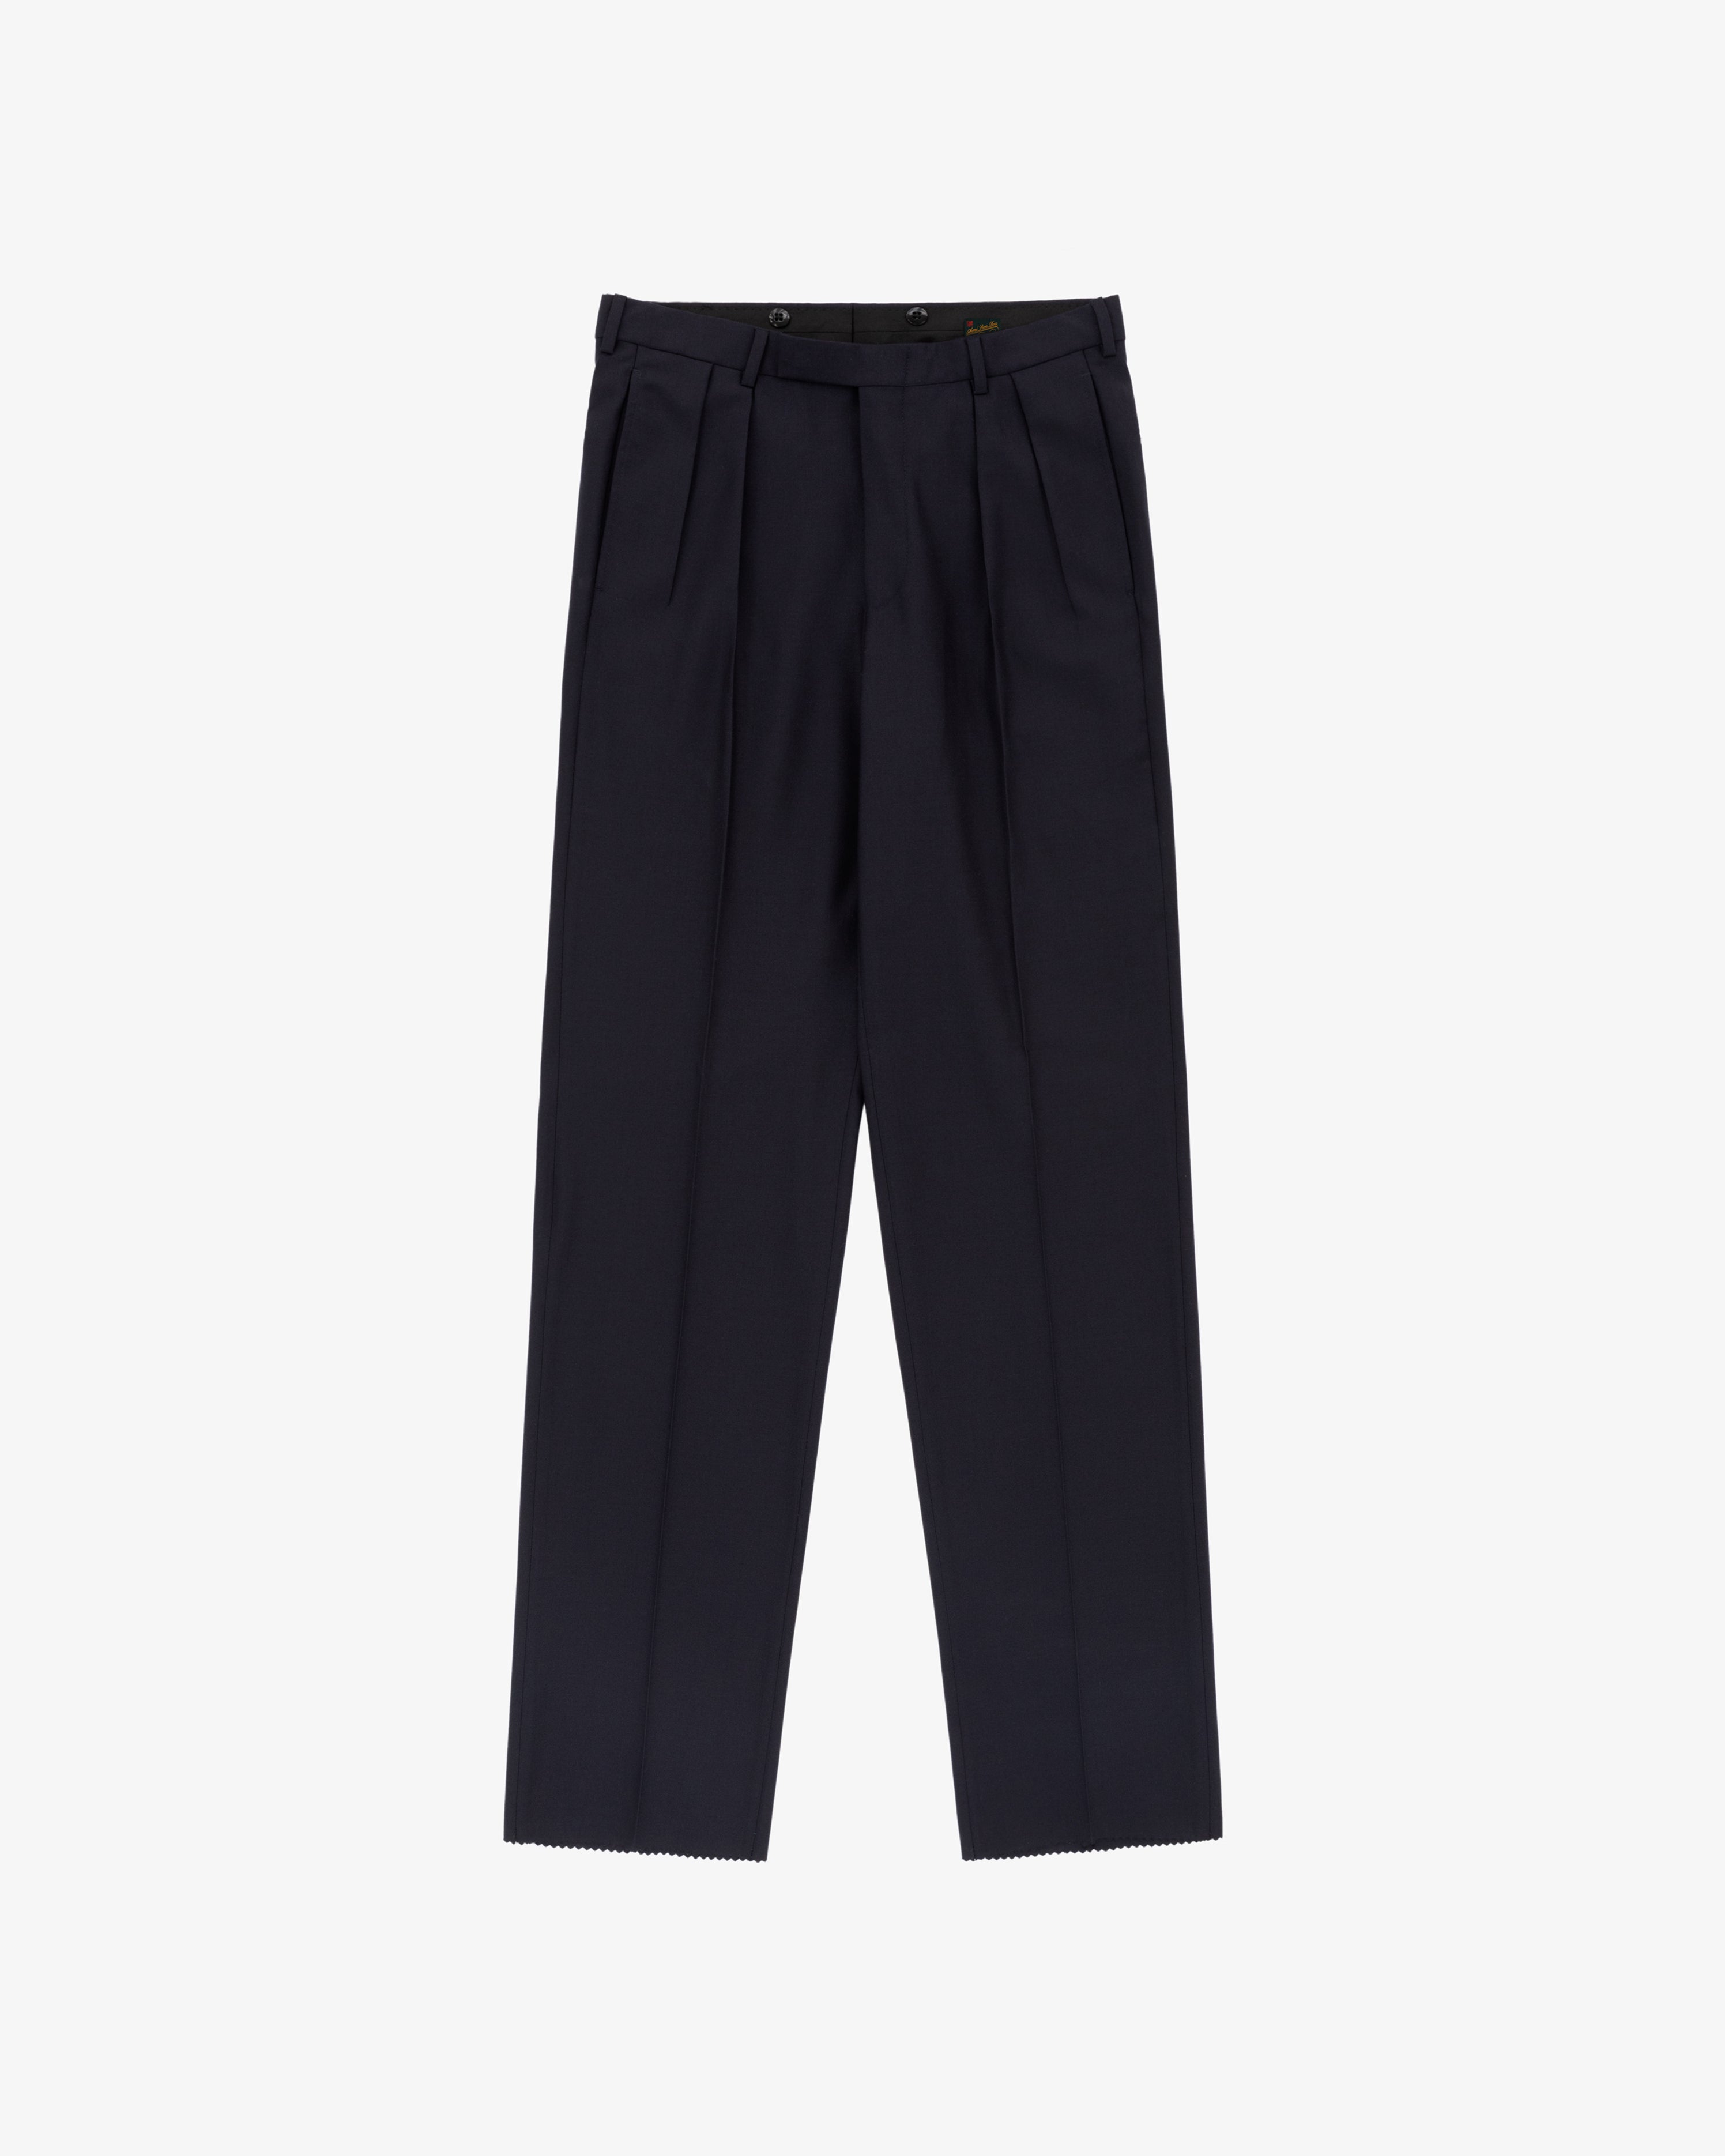 Black tropical wool tailored trousers